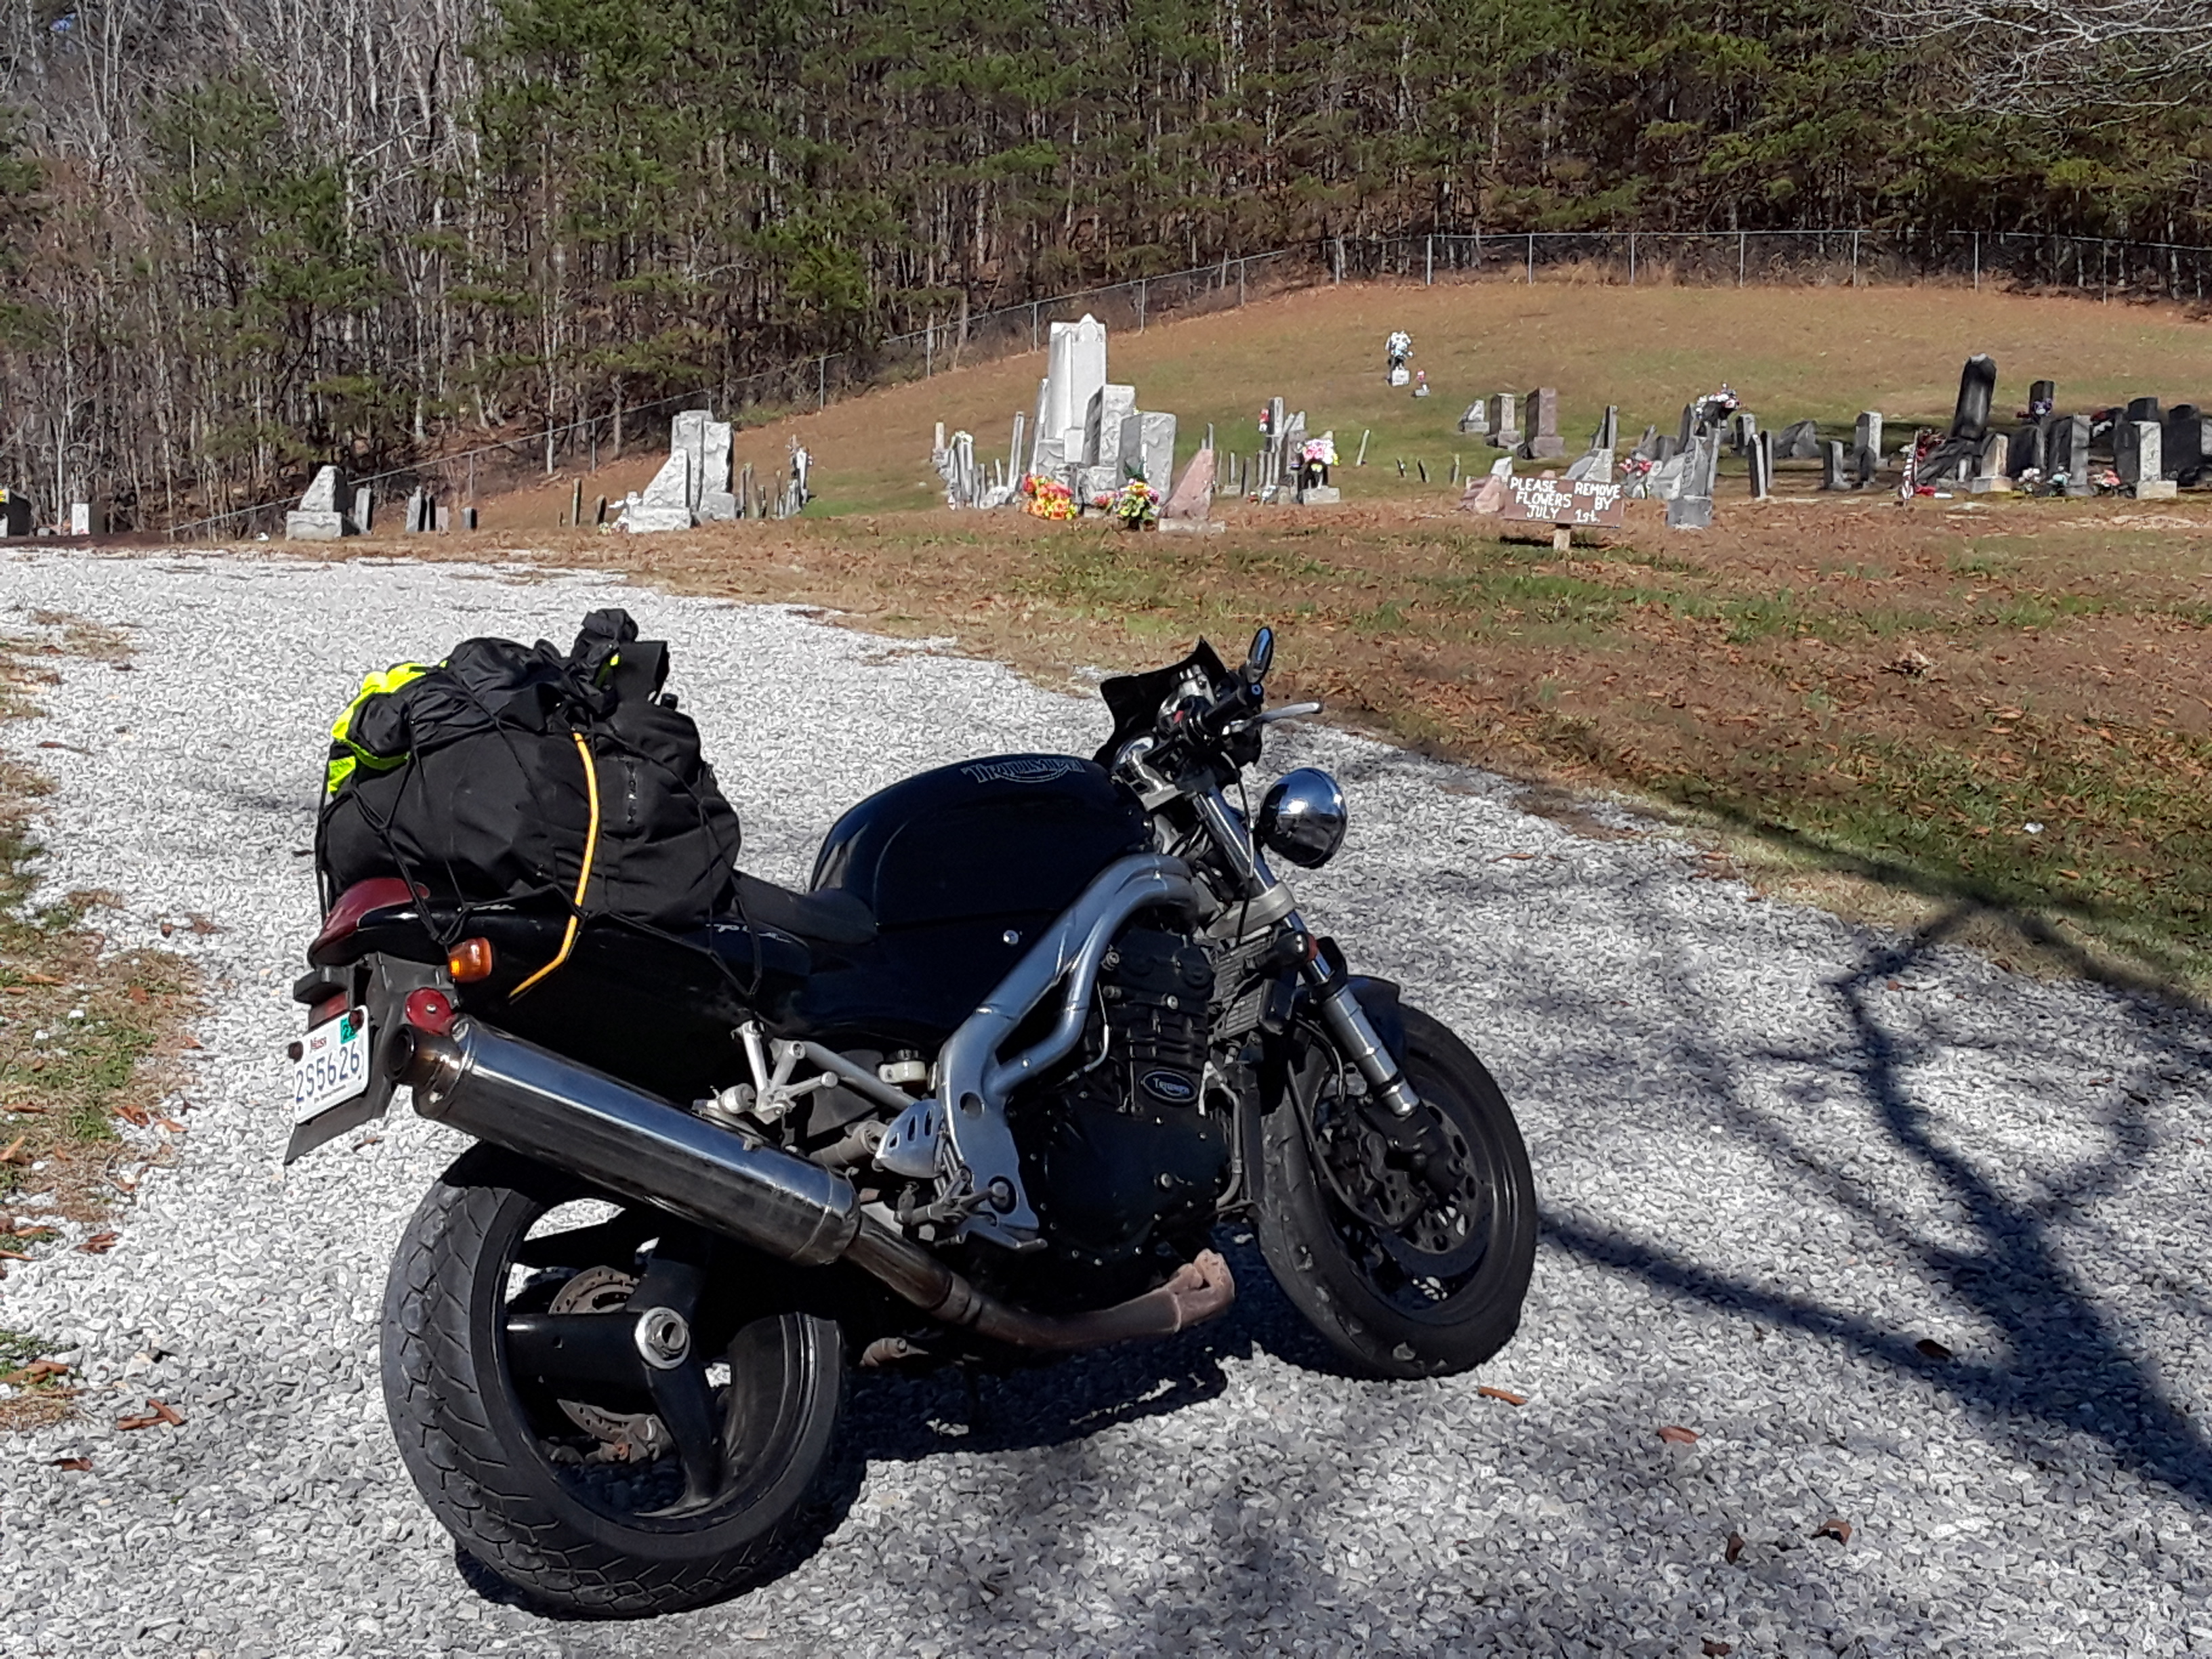 stopping by the Mt. Carmel cemetery in West Virginia